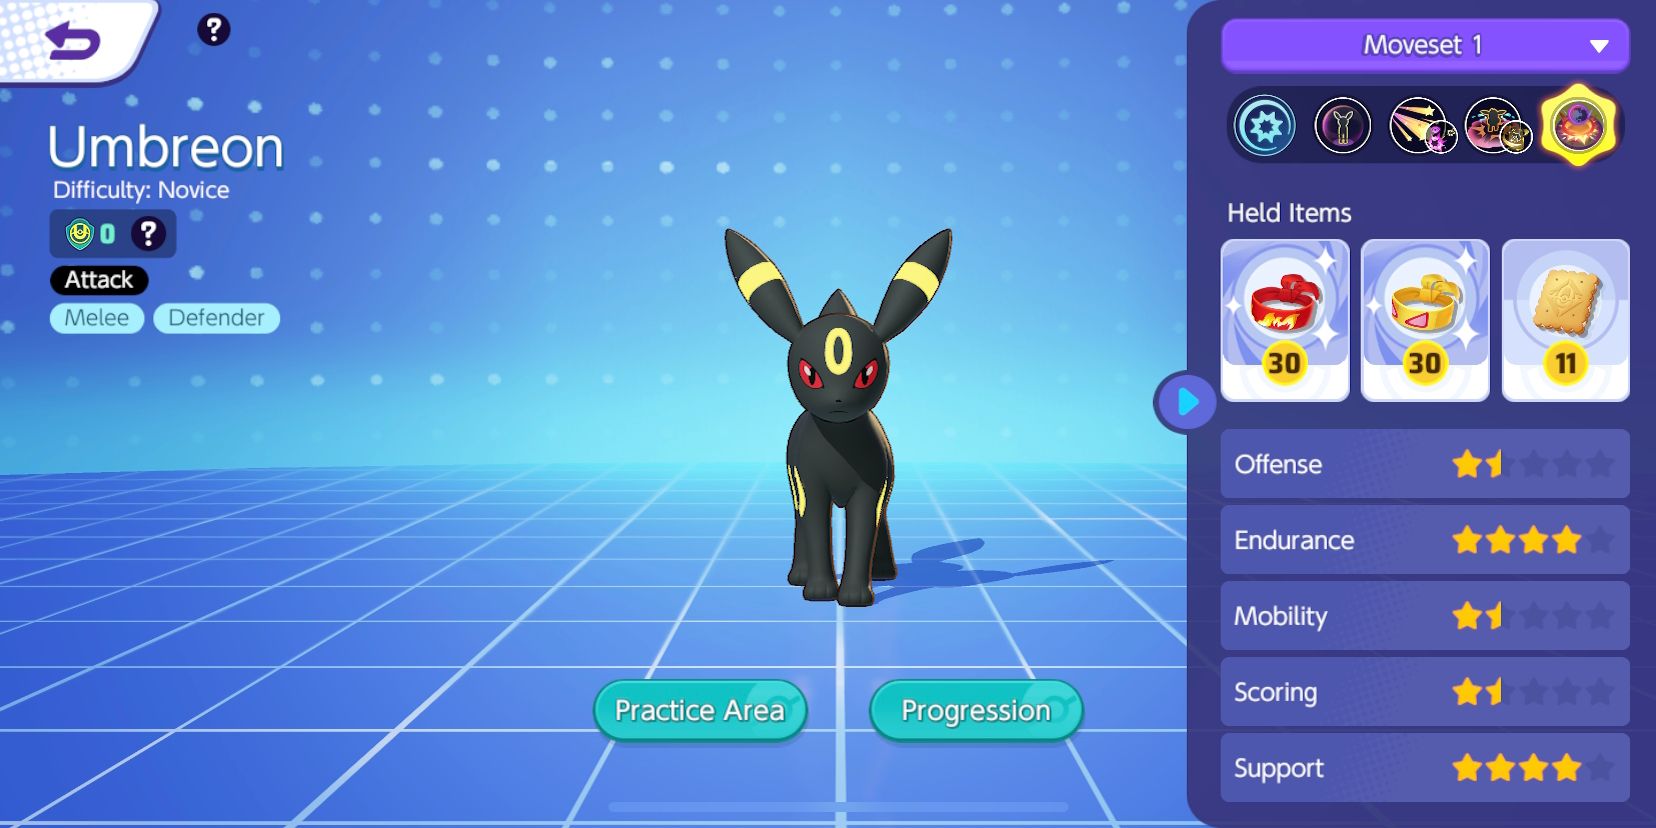 Umbreon from the Pokemon Unite Pokemon selection screen, showing its stats and Held Items